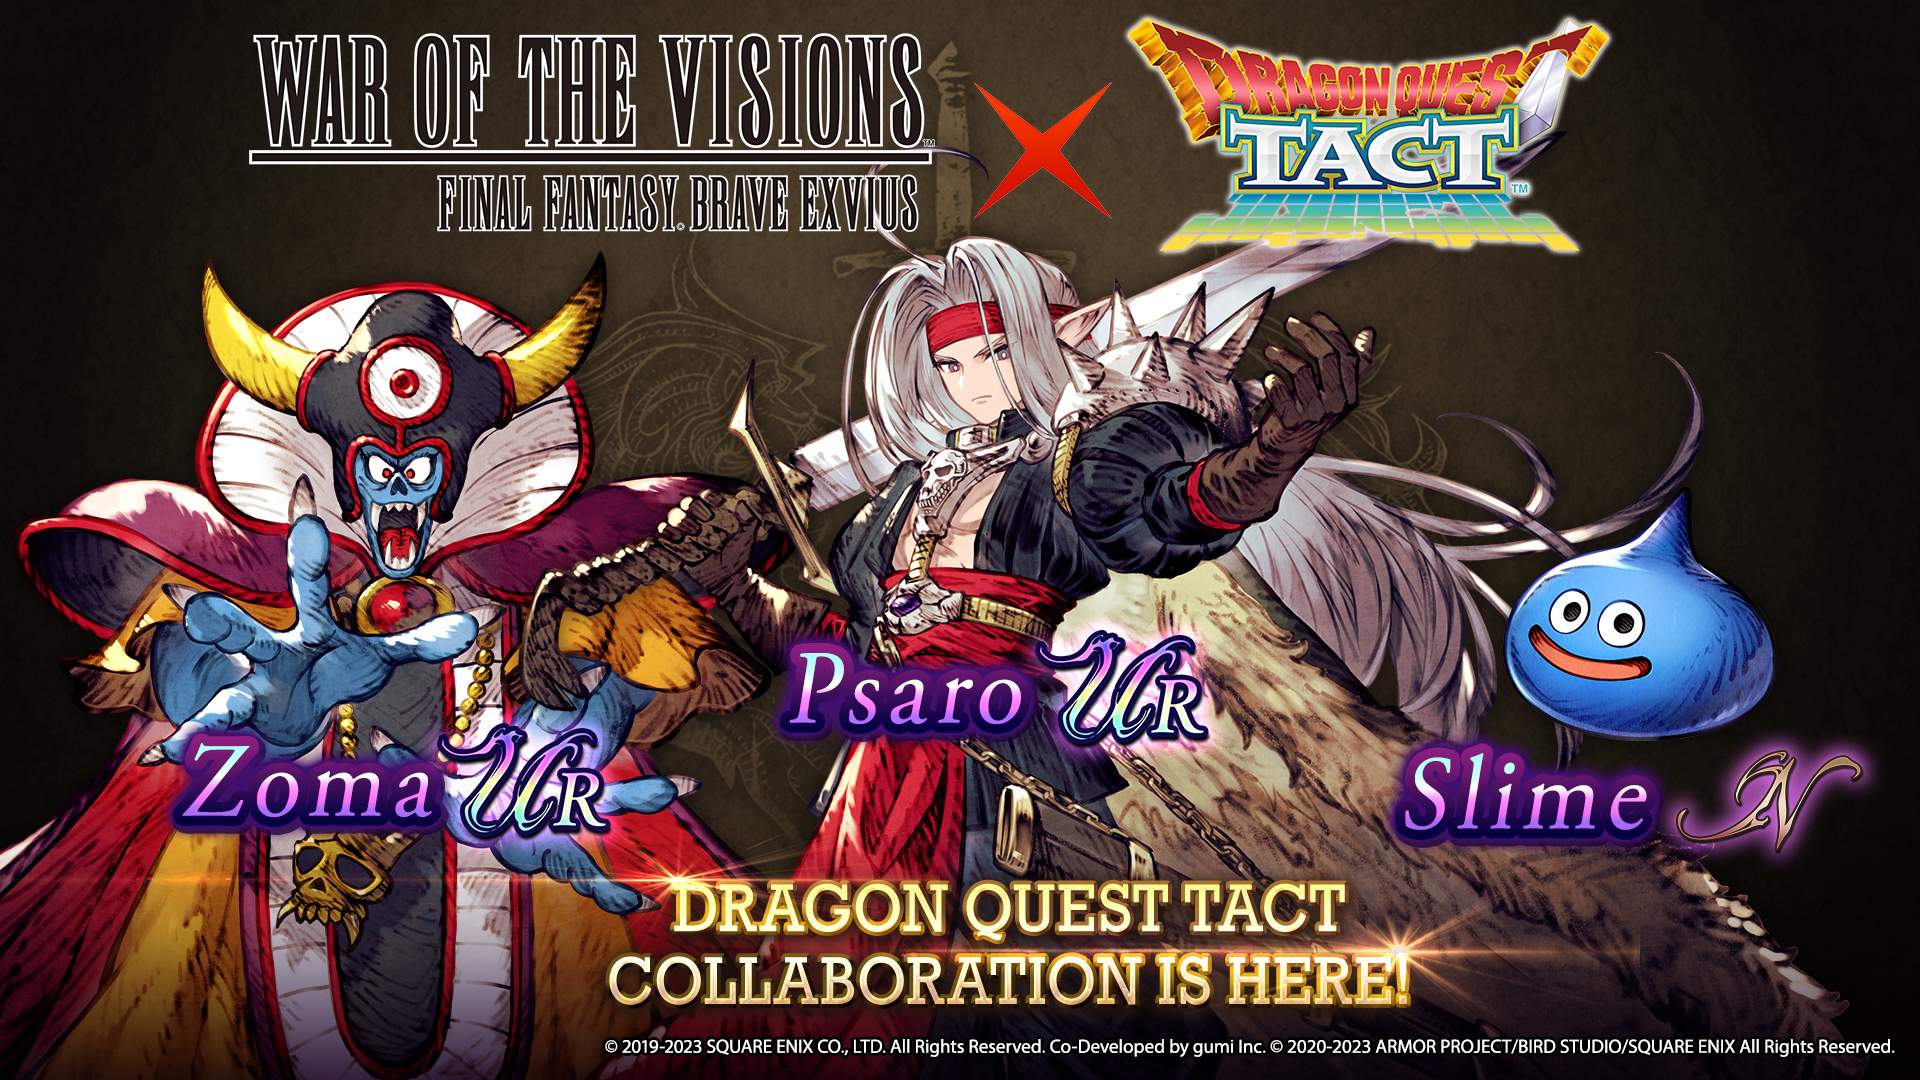 New units Zoma, Psaro and Slime line up for the DRAGON QUEST TACT collab in WAR OF THE VISIONS FFBE